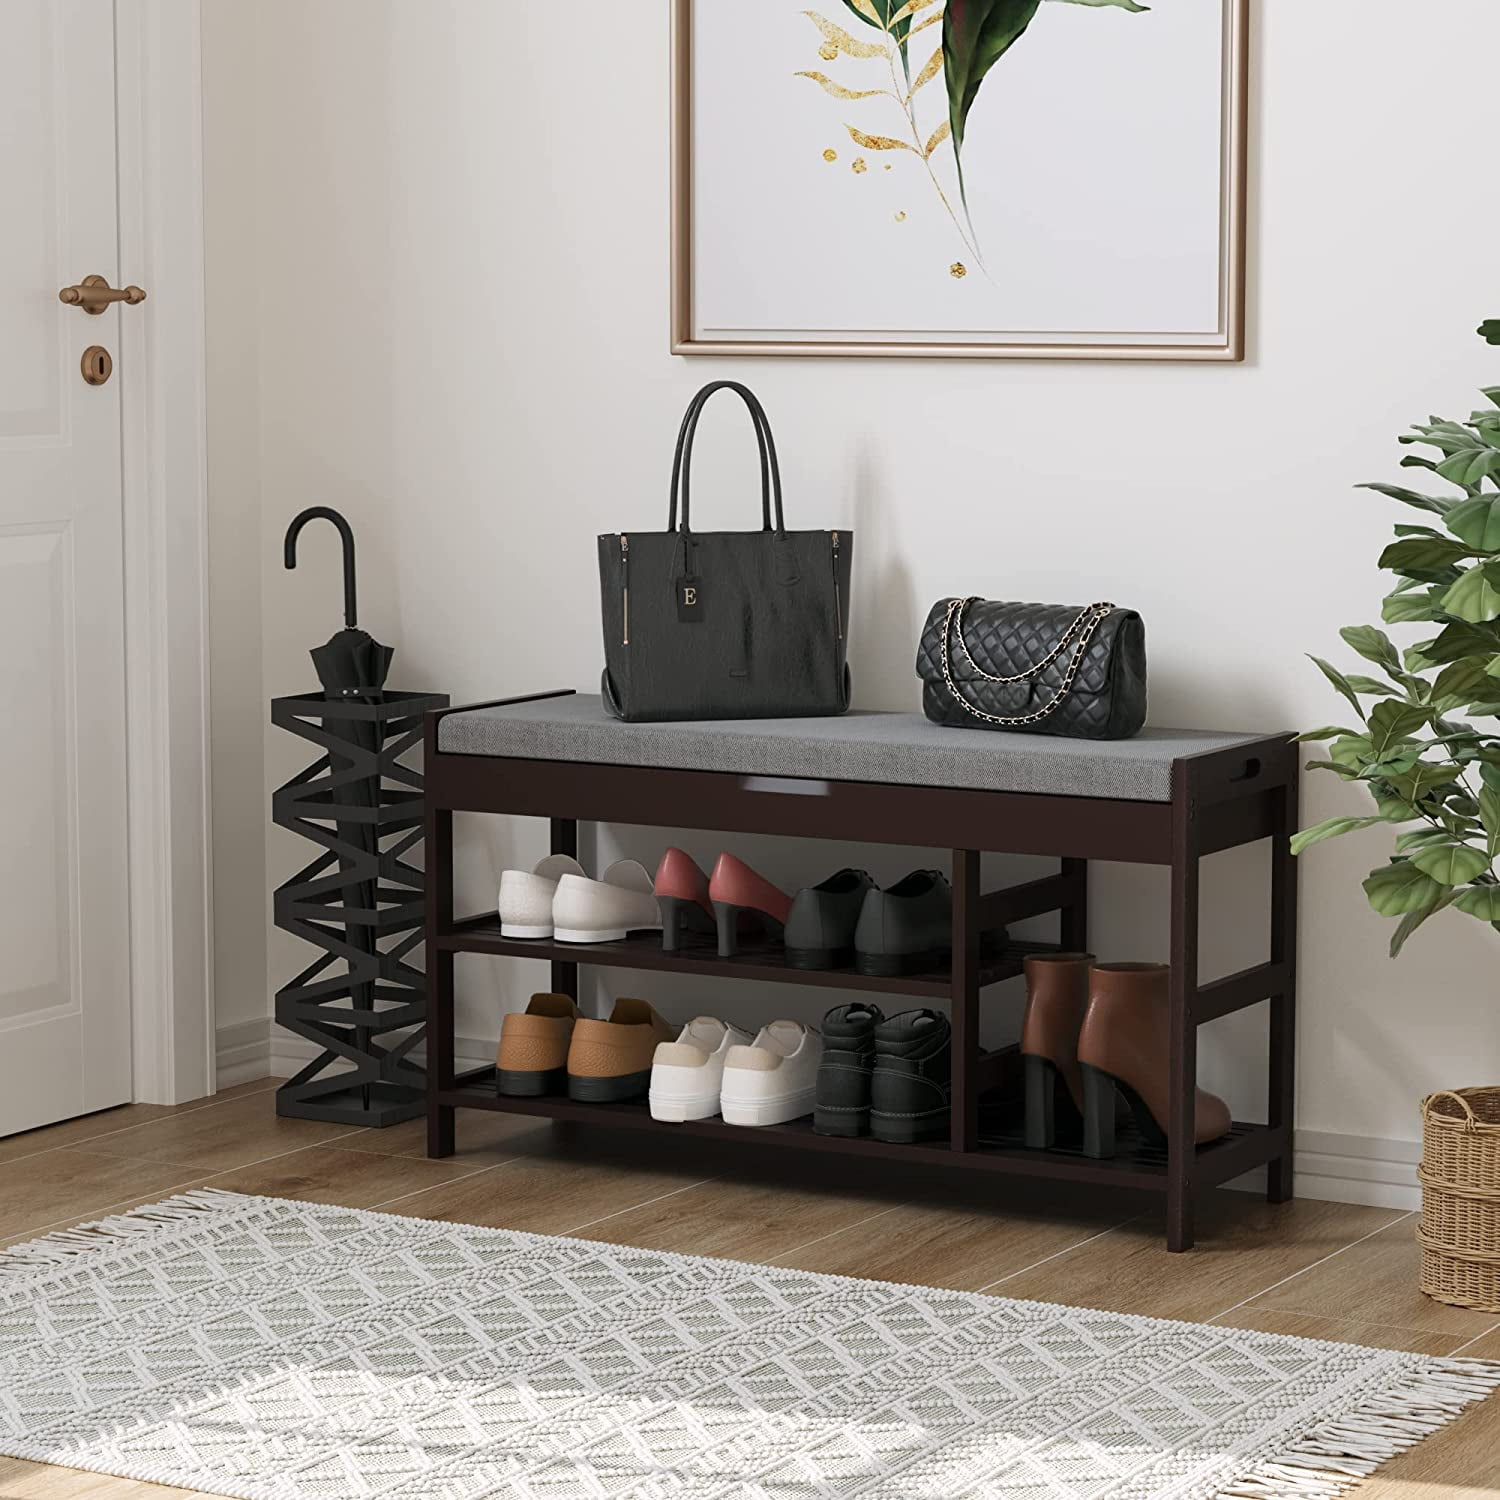 Homfa 2-Tiers Shoe Bench Rack with Padded Seat, Up to 7 Shoes Storage ...